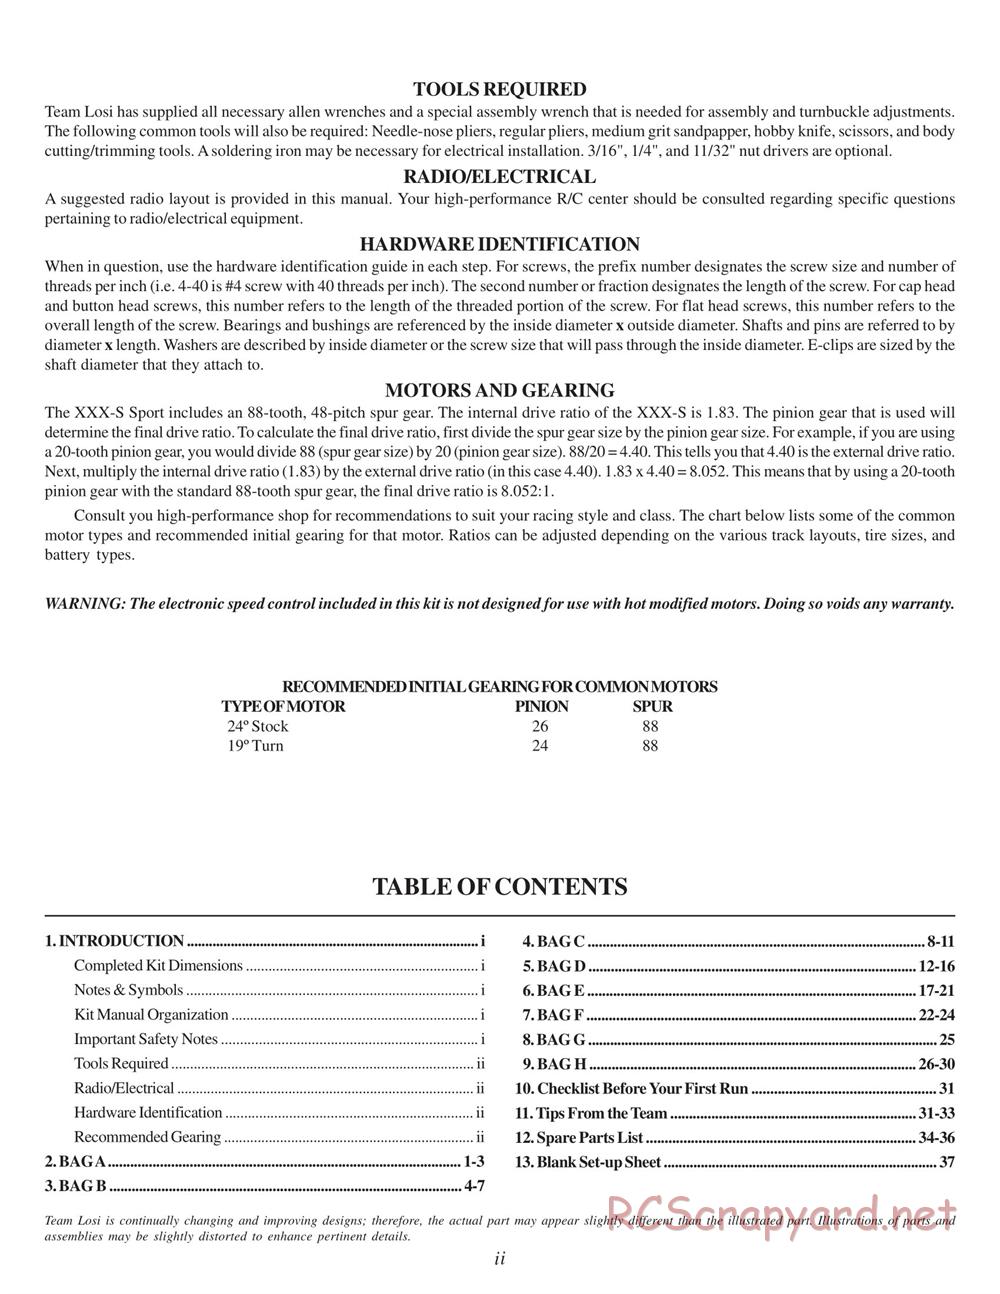 Team Losi - XXX-S Sport - Manual - Page 3